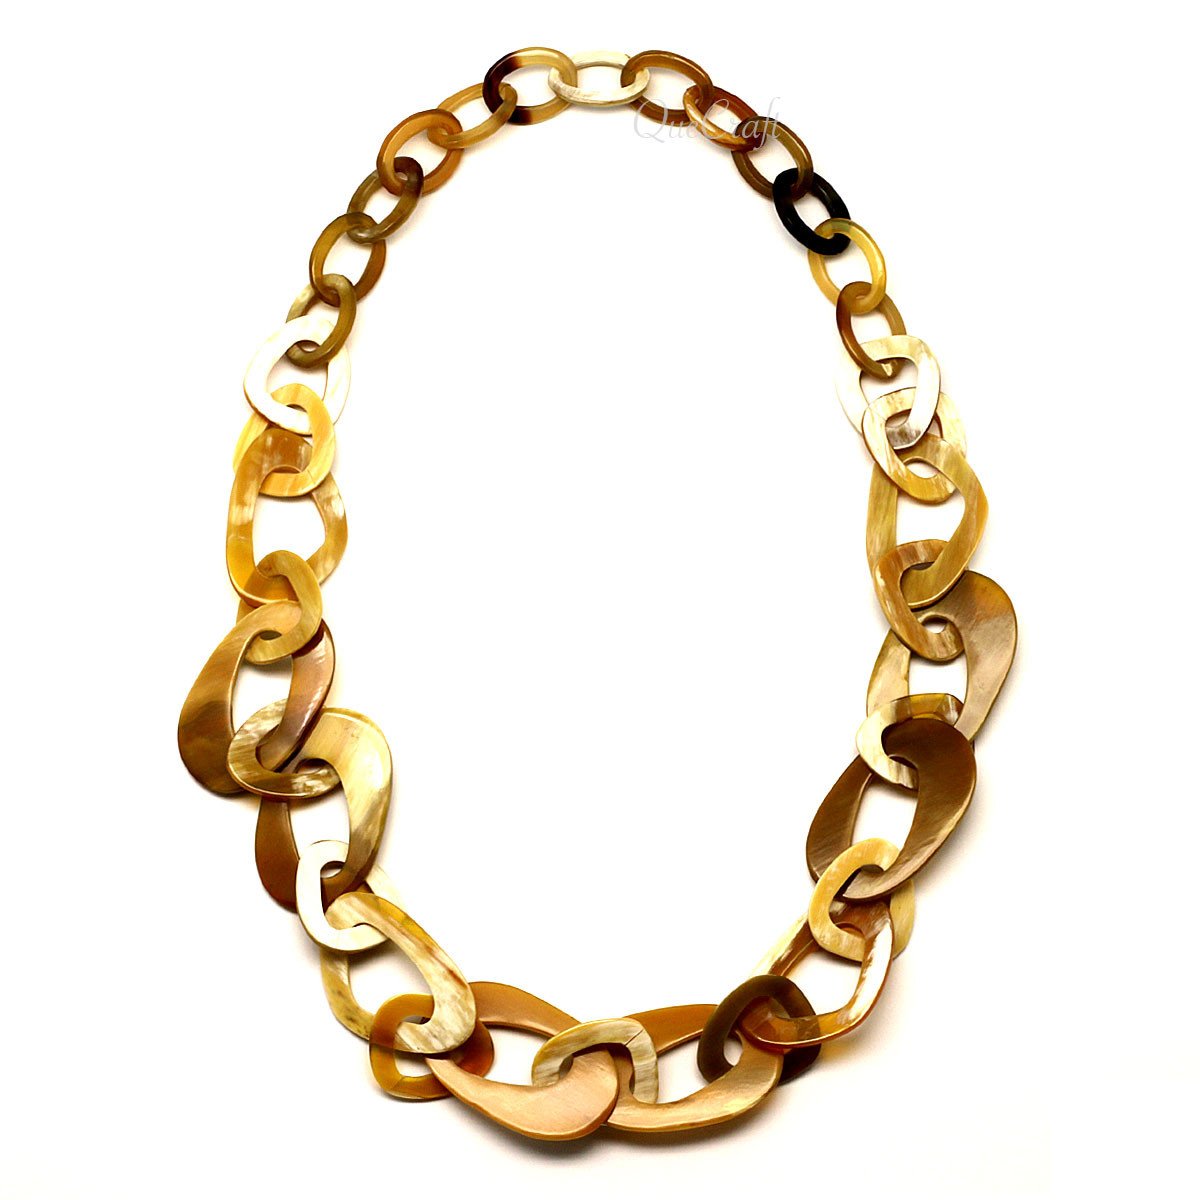 Horn Chain Necklace #5261 - HORN JEWELRY